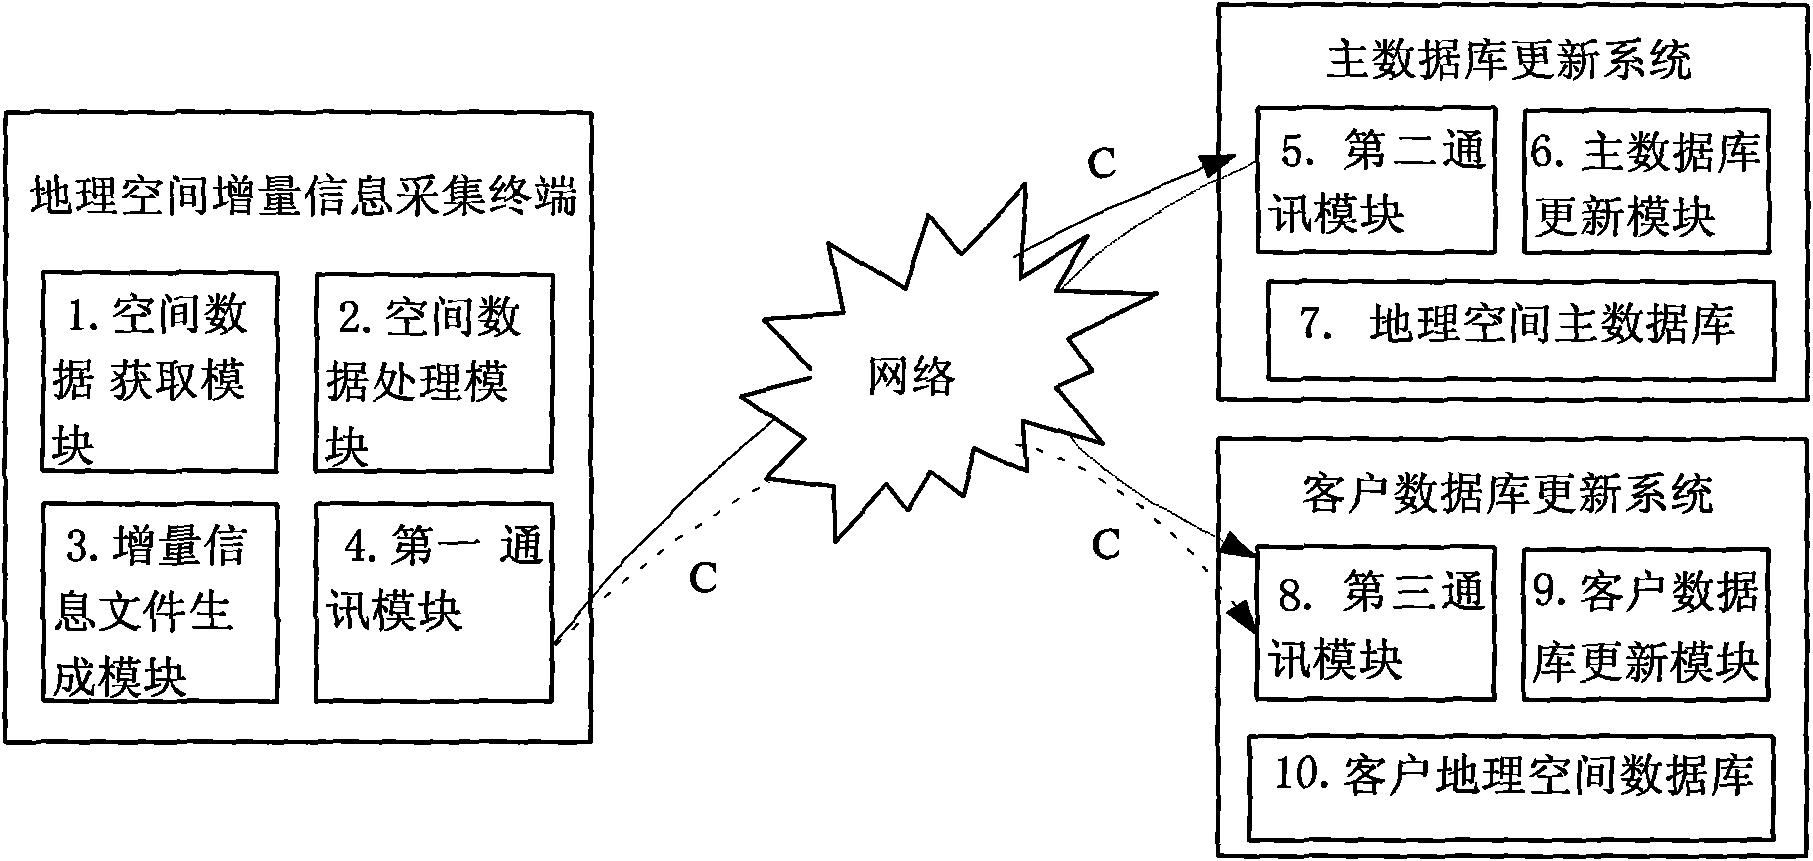 System and method for integration of change information collection and spatiotemporal data update]